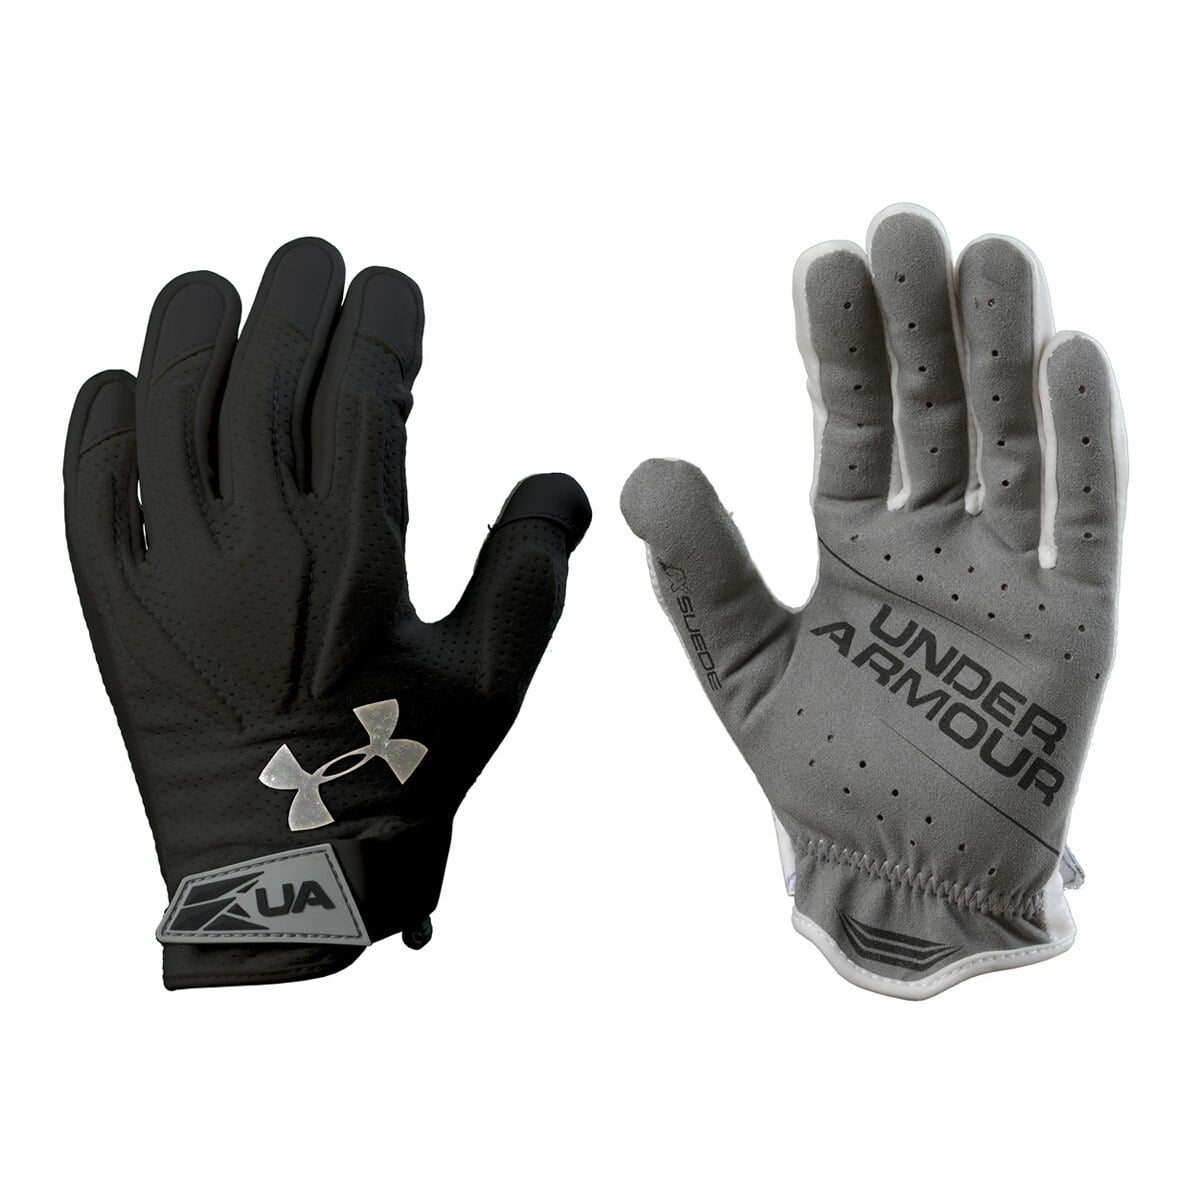 Under Armour Women's Black Ad Gray Illusion Lacrosse Gloves ILLGLW-BLK 